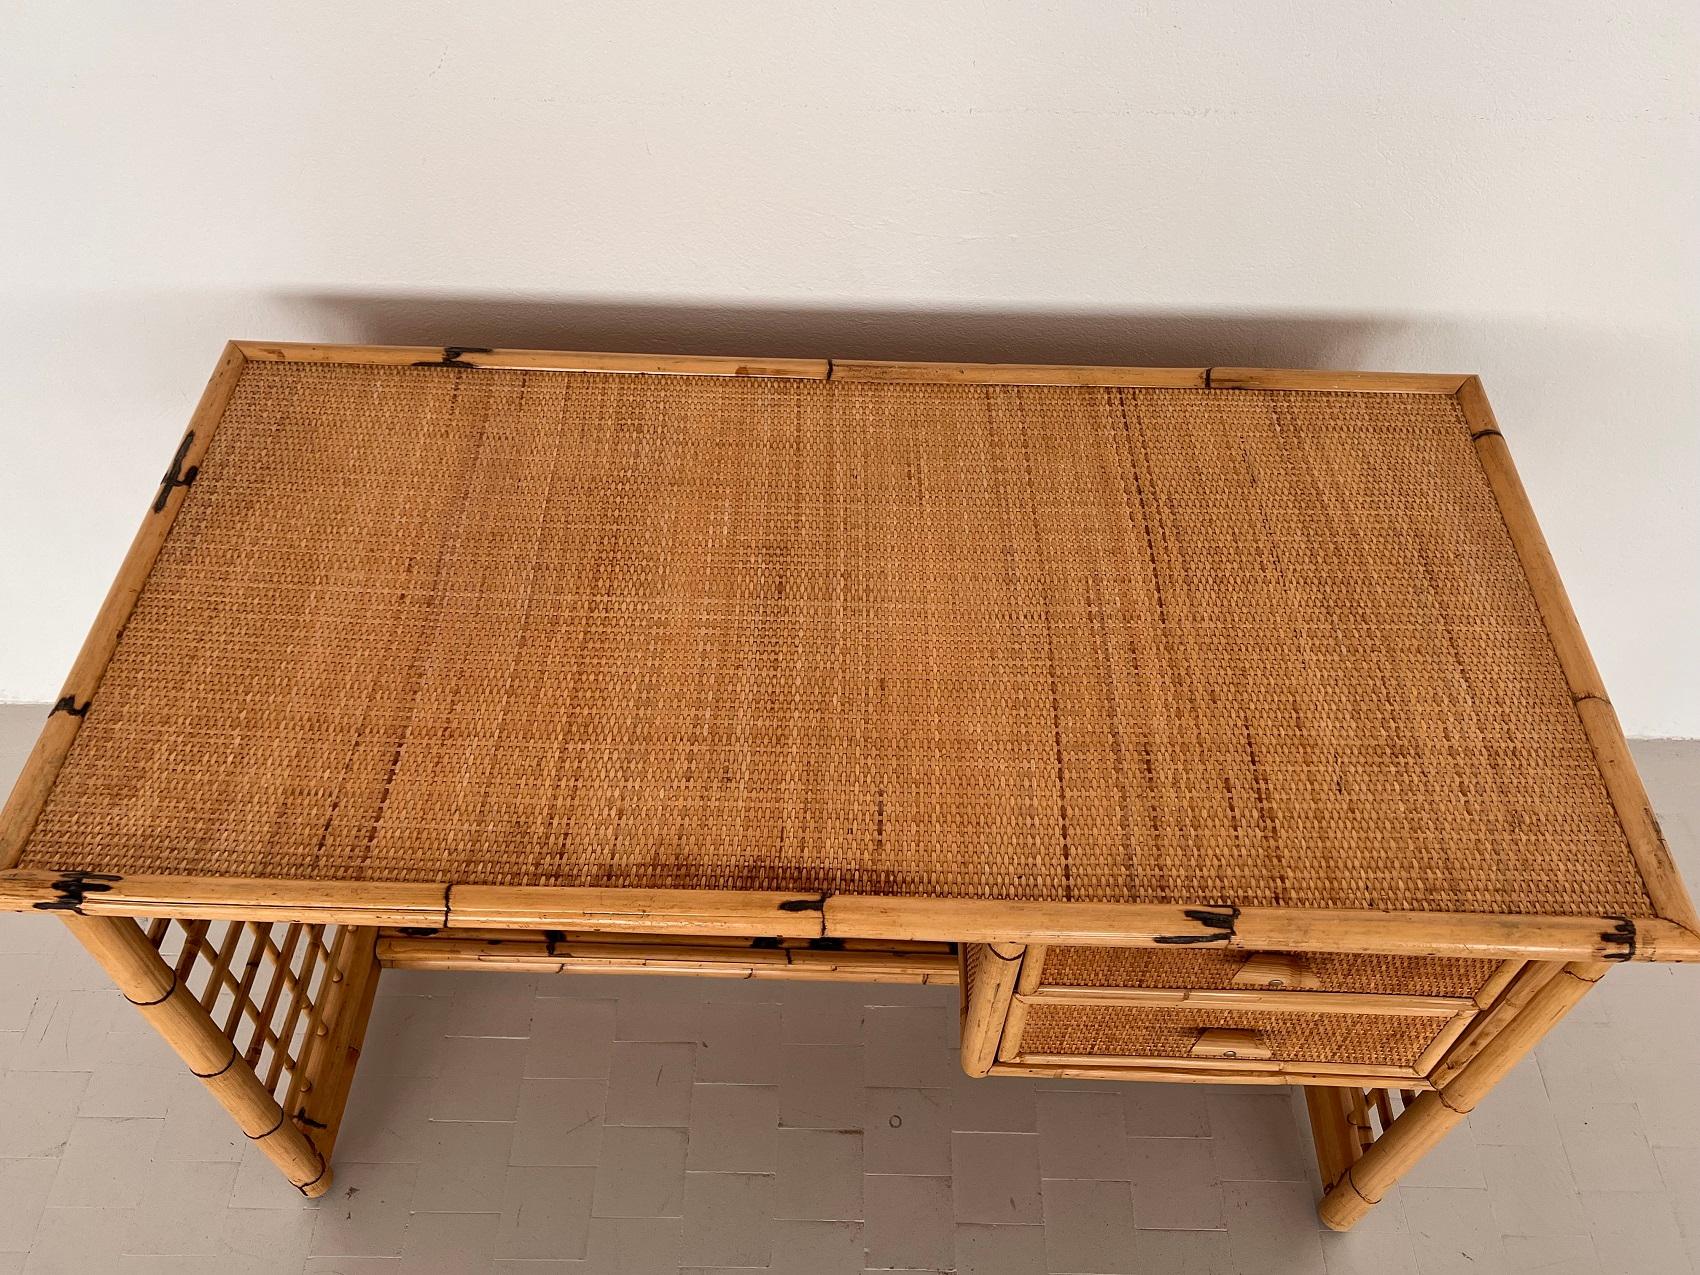 Italian Midcentury Bamboo and Rattan Desk or Vanity with two Drawers, 1970s For Sale 6